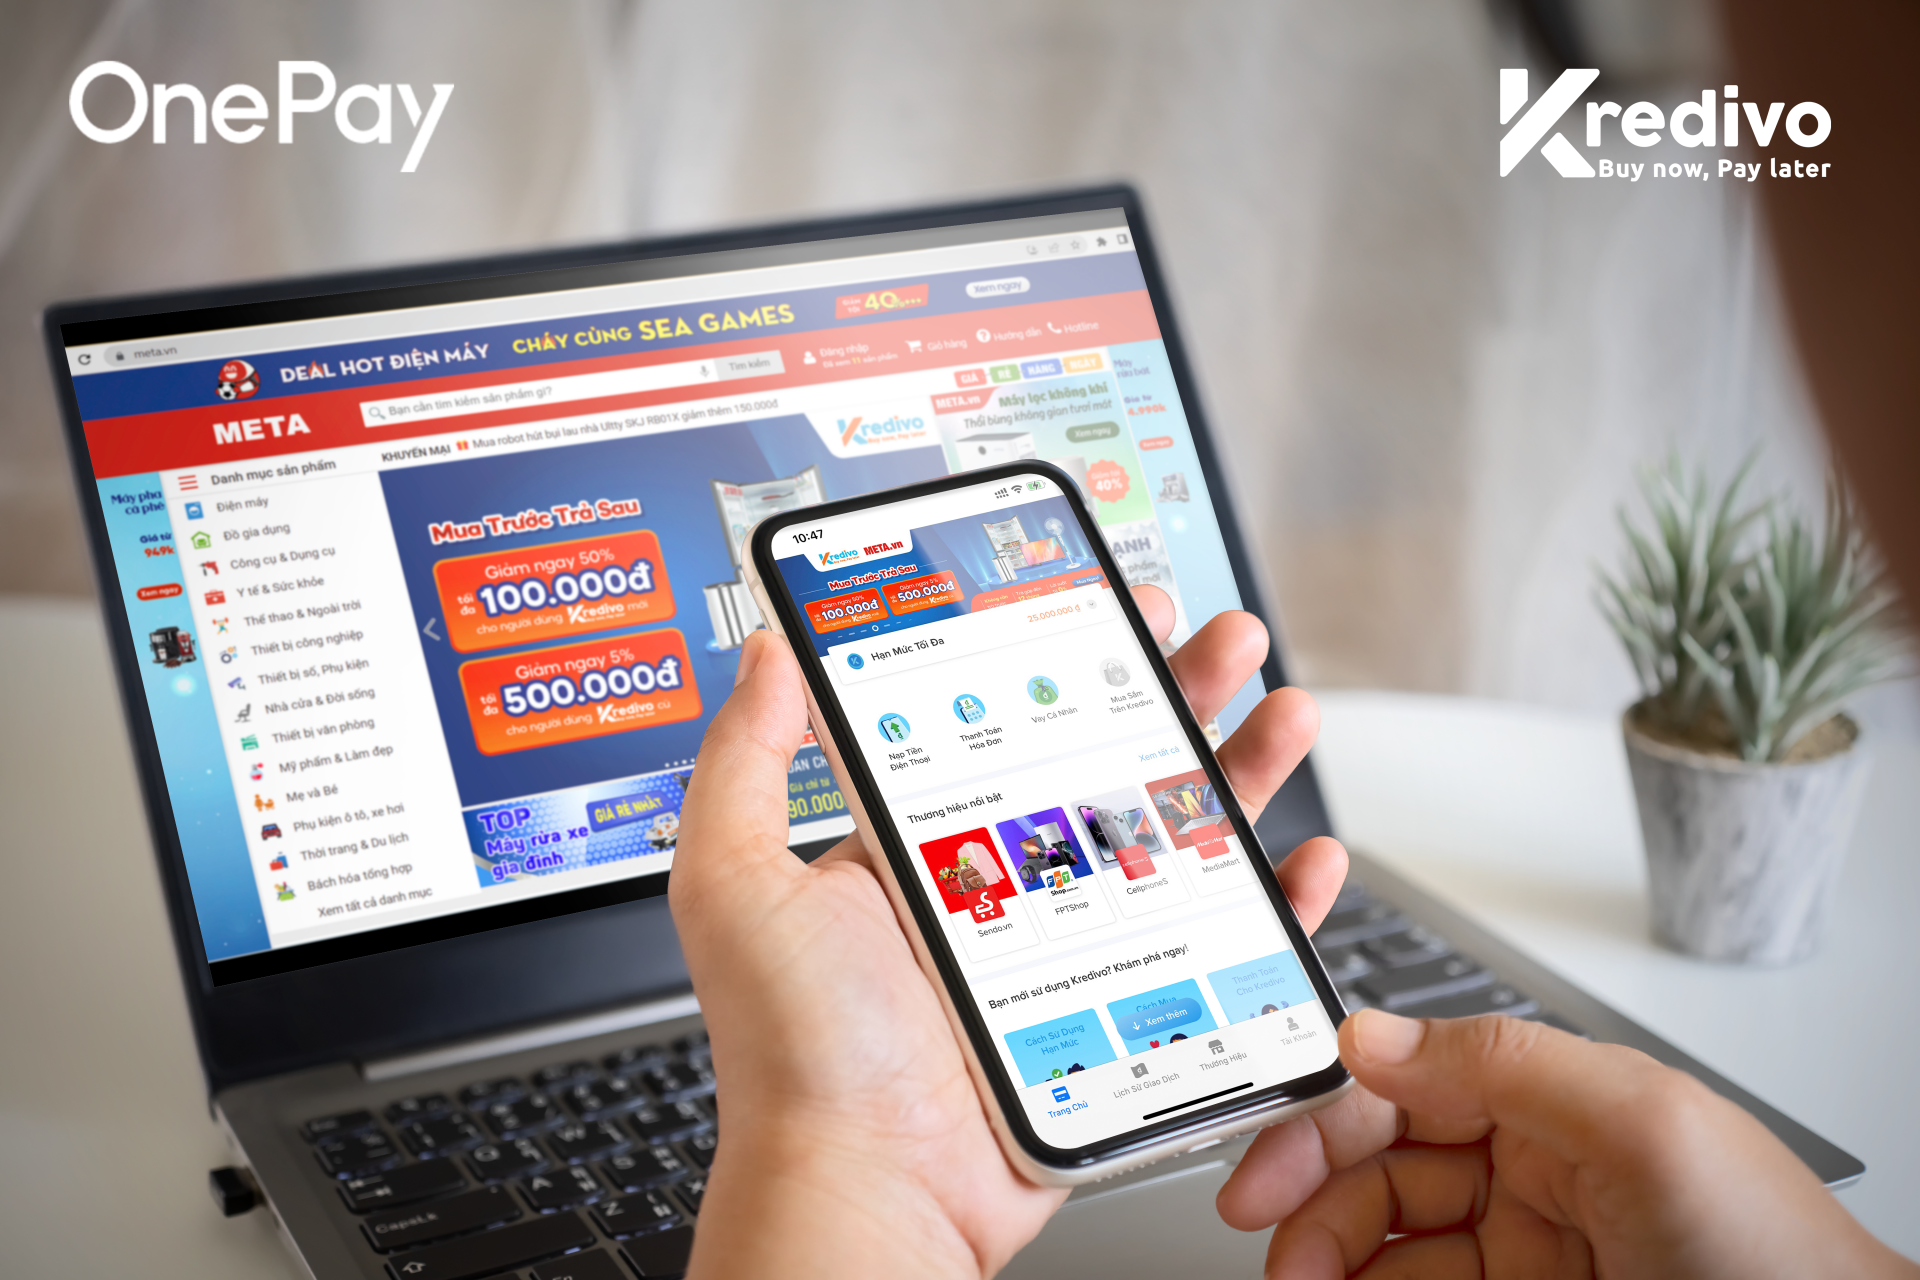 Kredivo enters into collaboration with OnePay